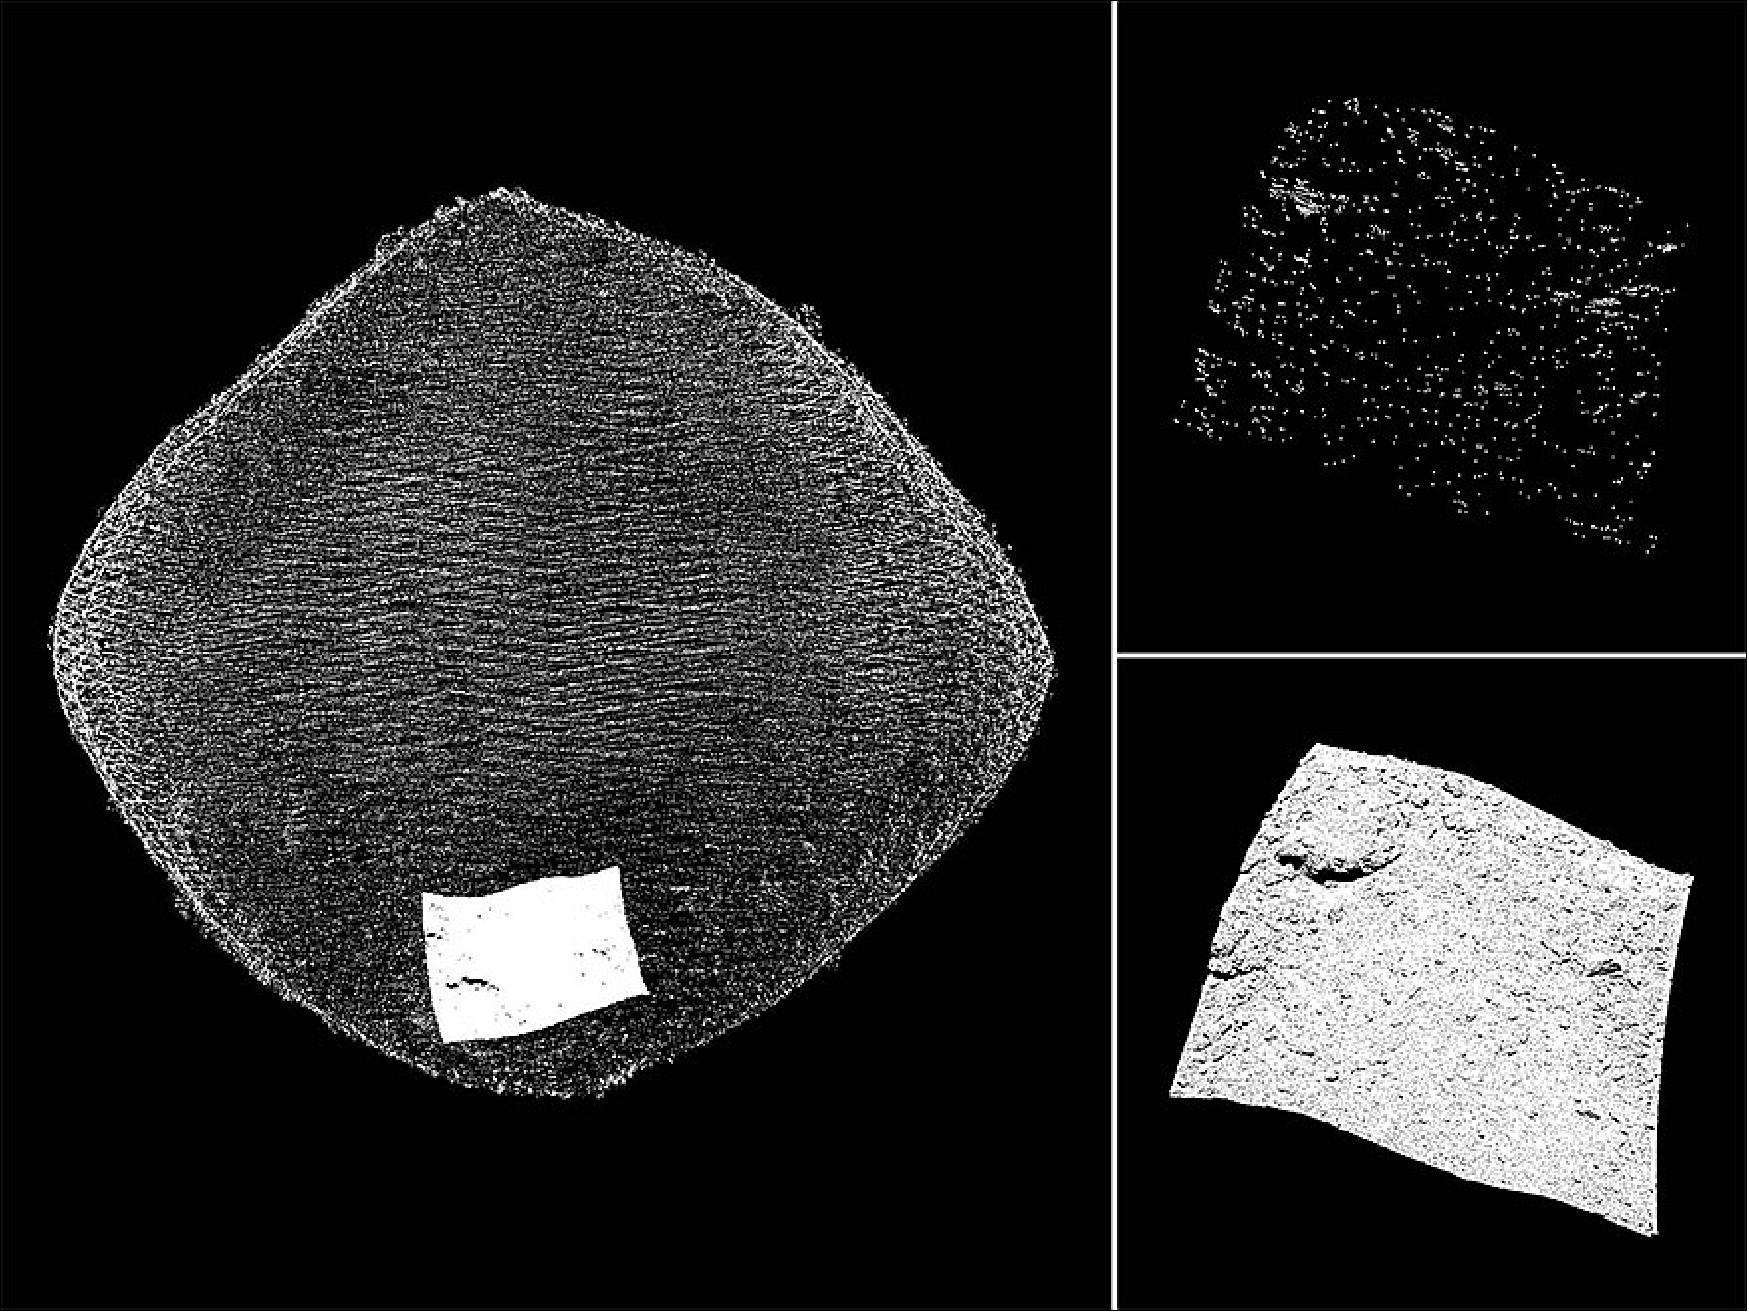 Figure 50: The same area of asteroid Bennu's surface – a potential sample site known as Sandpiper – was measured by each of OLA's lasers. OLA's high-energy laser transmitter (HELT) captured its measurements from a distance of 5 km (top right). OLA's low-energy laser transmitter (LELT) captured the details of the site's boulders and craters from a distance of only 700 m (bottom right); image creation: Michael Daly, Centre for Research in Earth and Space Science, York University, credit: NASA/University of Arizona/Canadian Space Agency/York University/MDA)